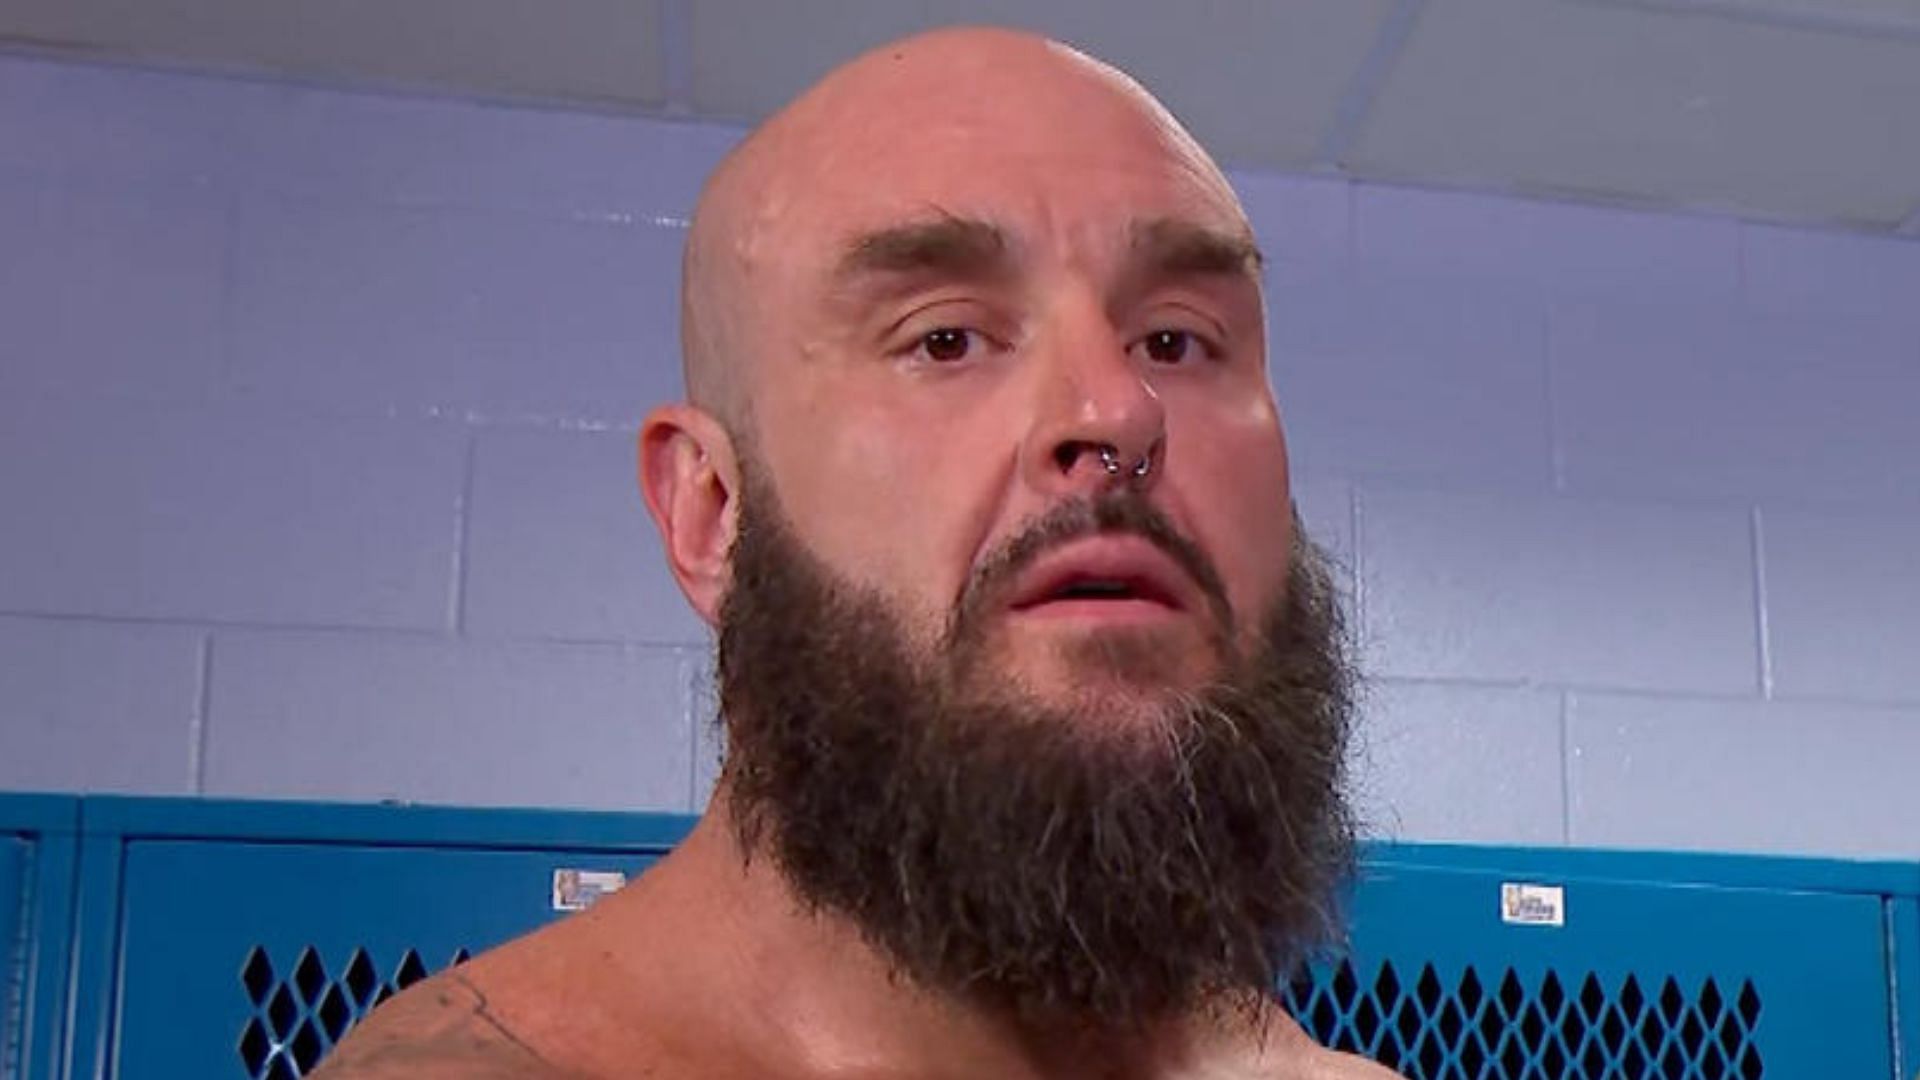 Braun Strowman is currently sidelined due to a neck injury